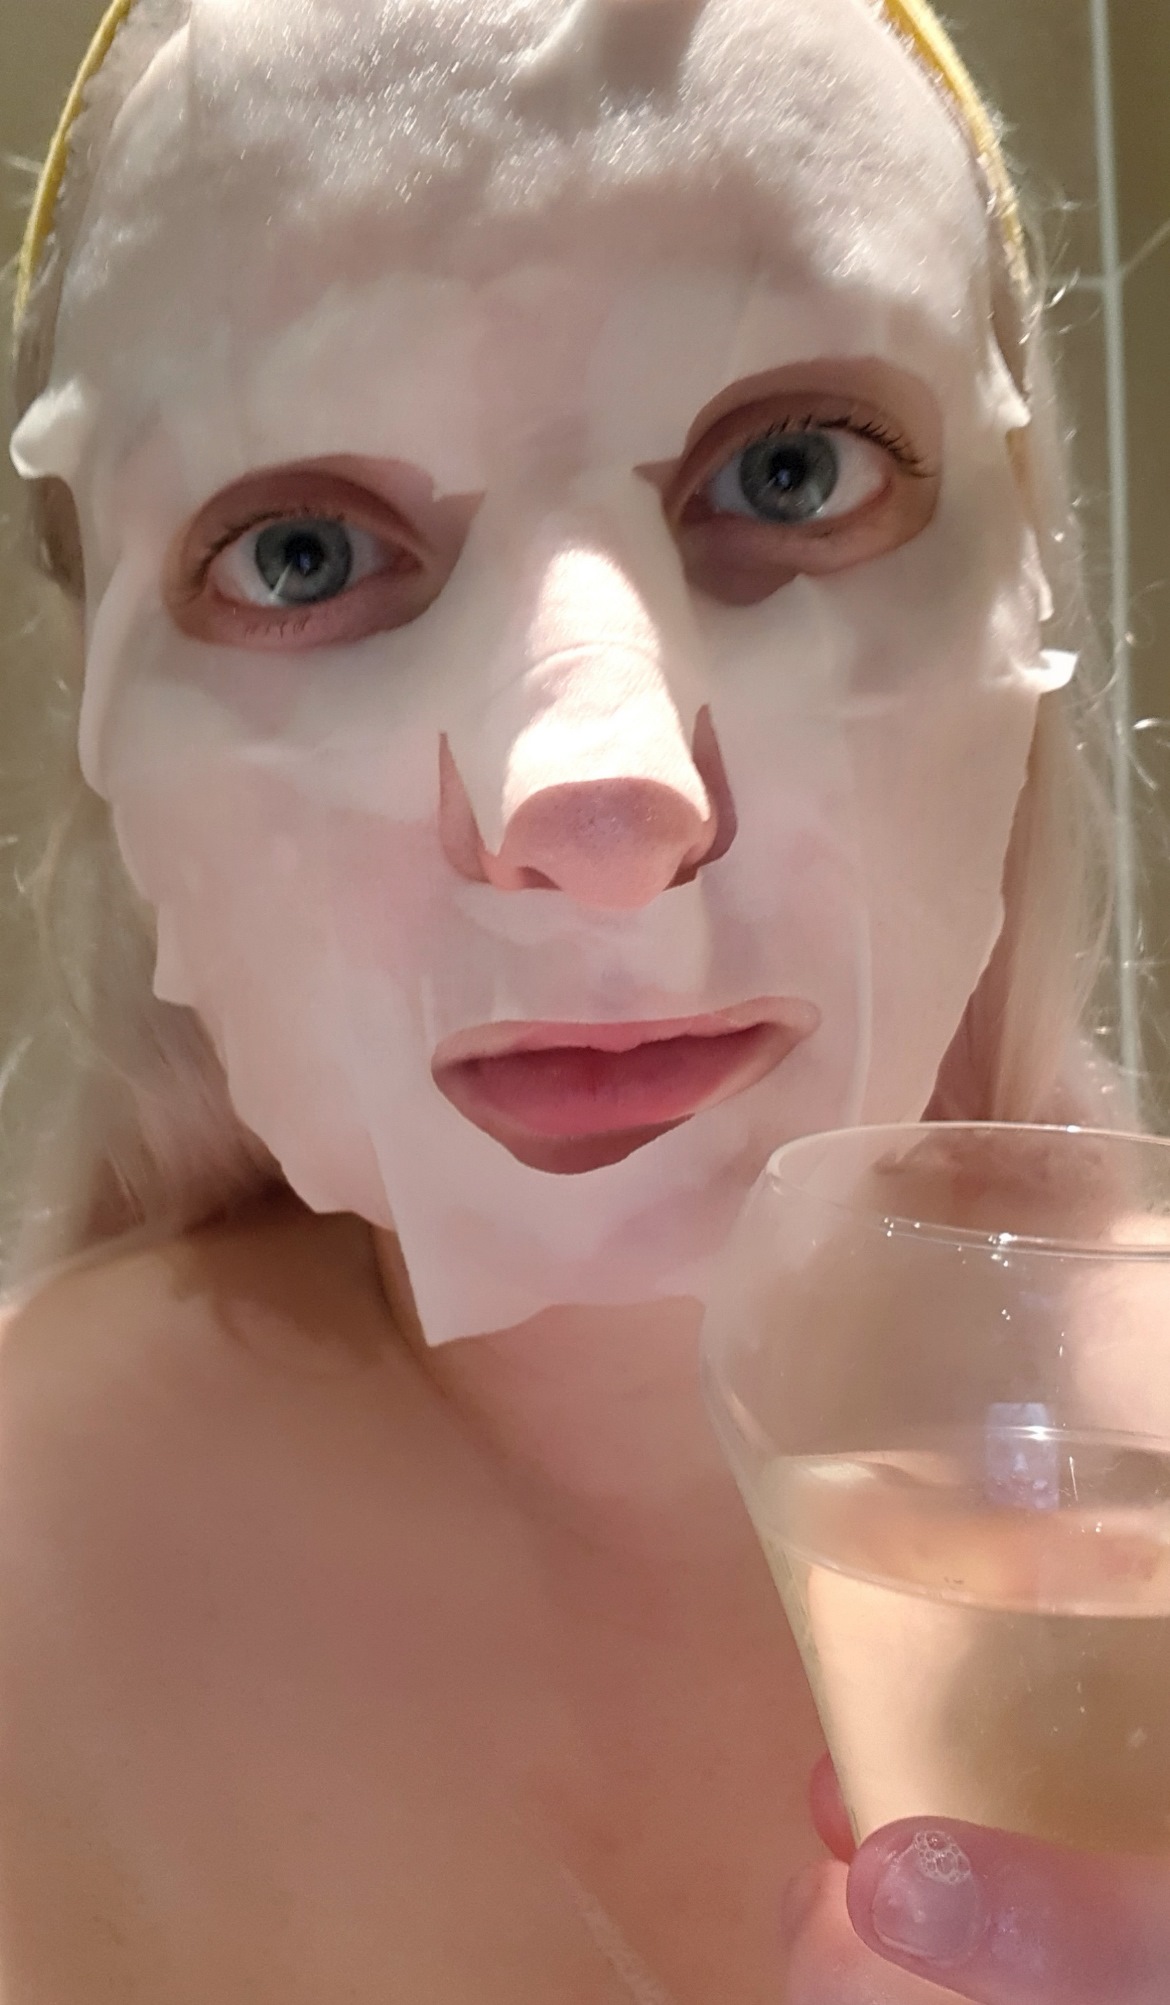 Face mask - My "Perfect" Night In with Sanctuary Bathrooms by BeckyBecky Blogs